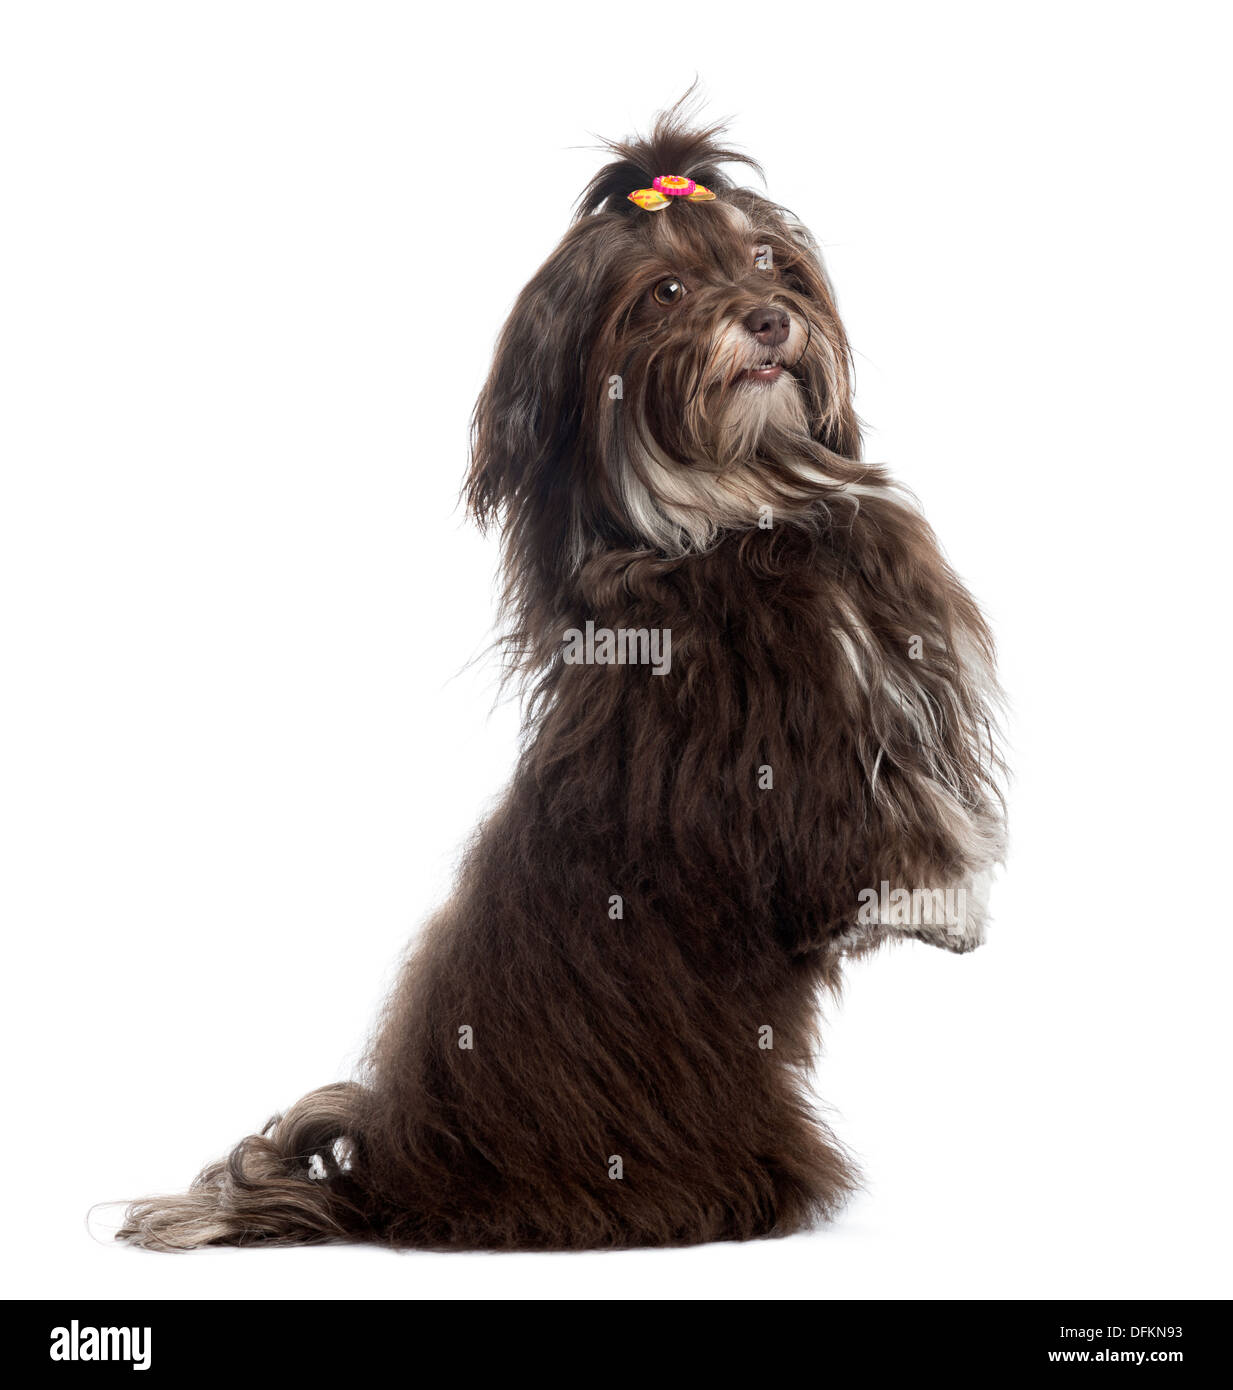 Side view of a Havanese upright, looking at the camera against white background Stock Photo